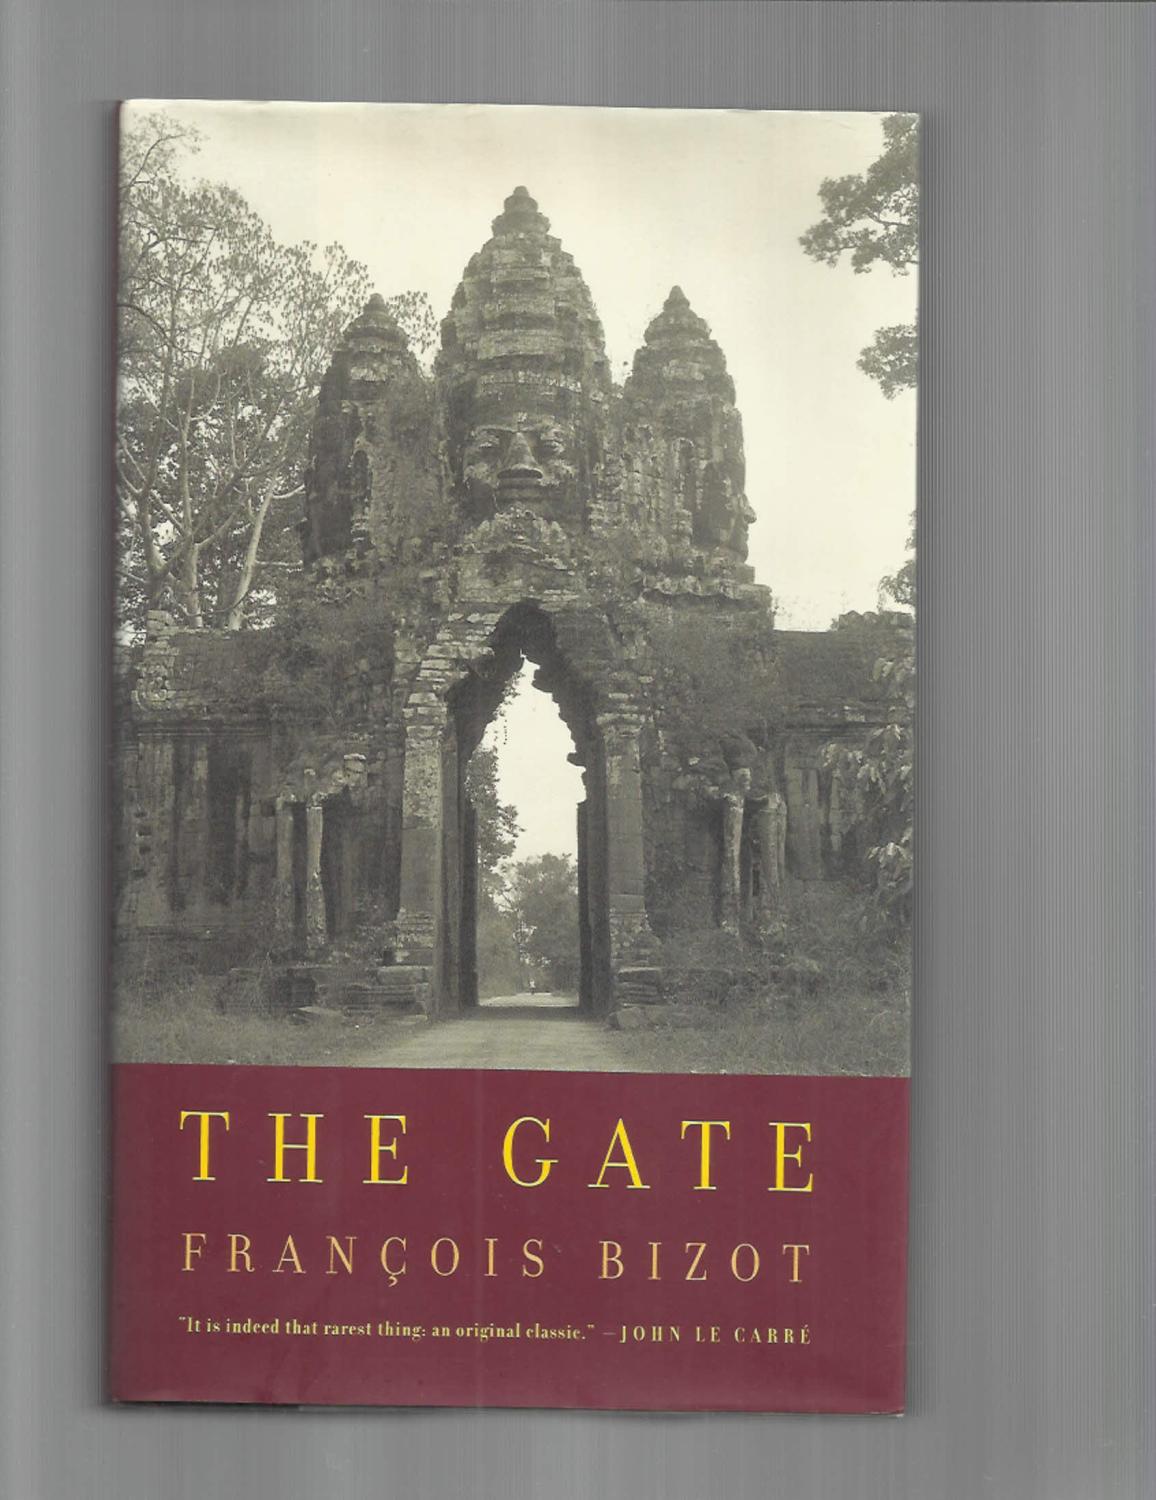 THE GATE. Translated From The French By Euan Cameron. With A Foreword By John Le Carre'. - Bizot, Francois